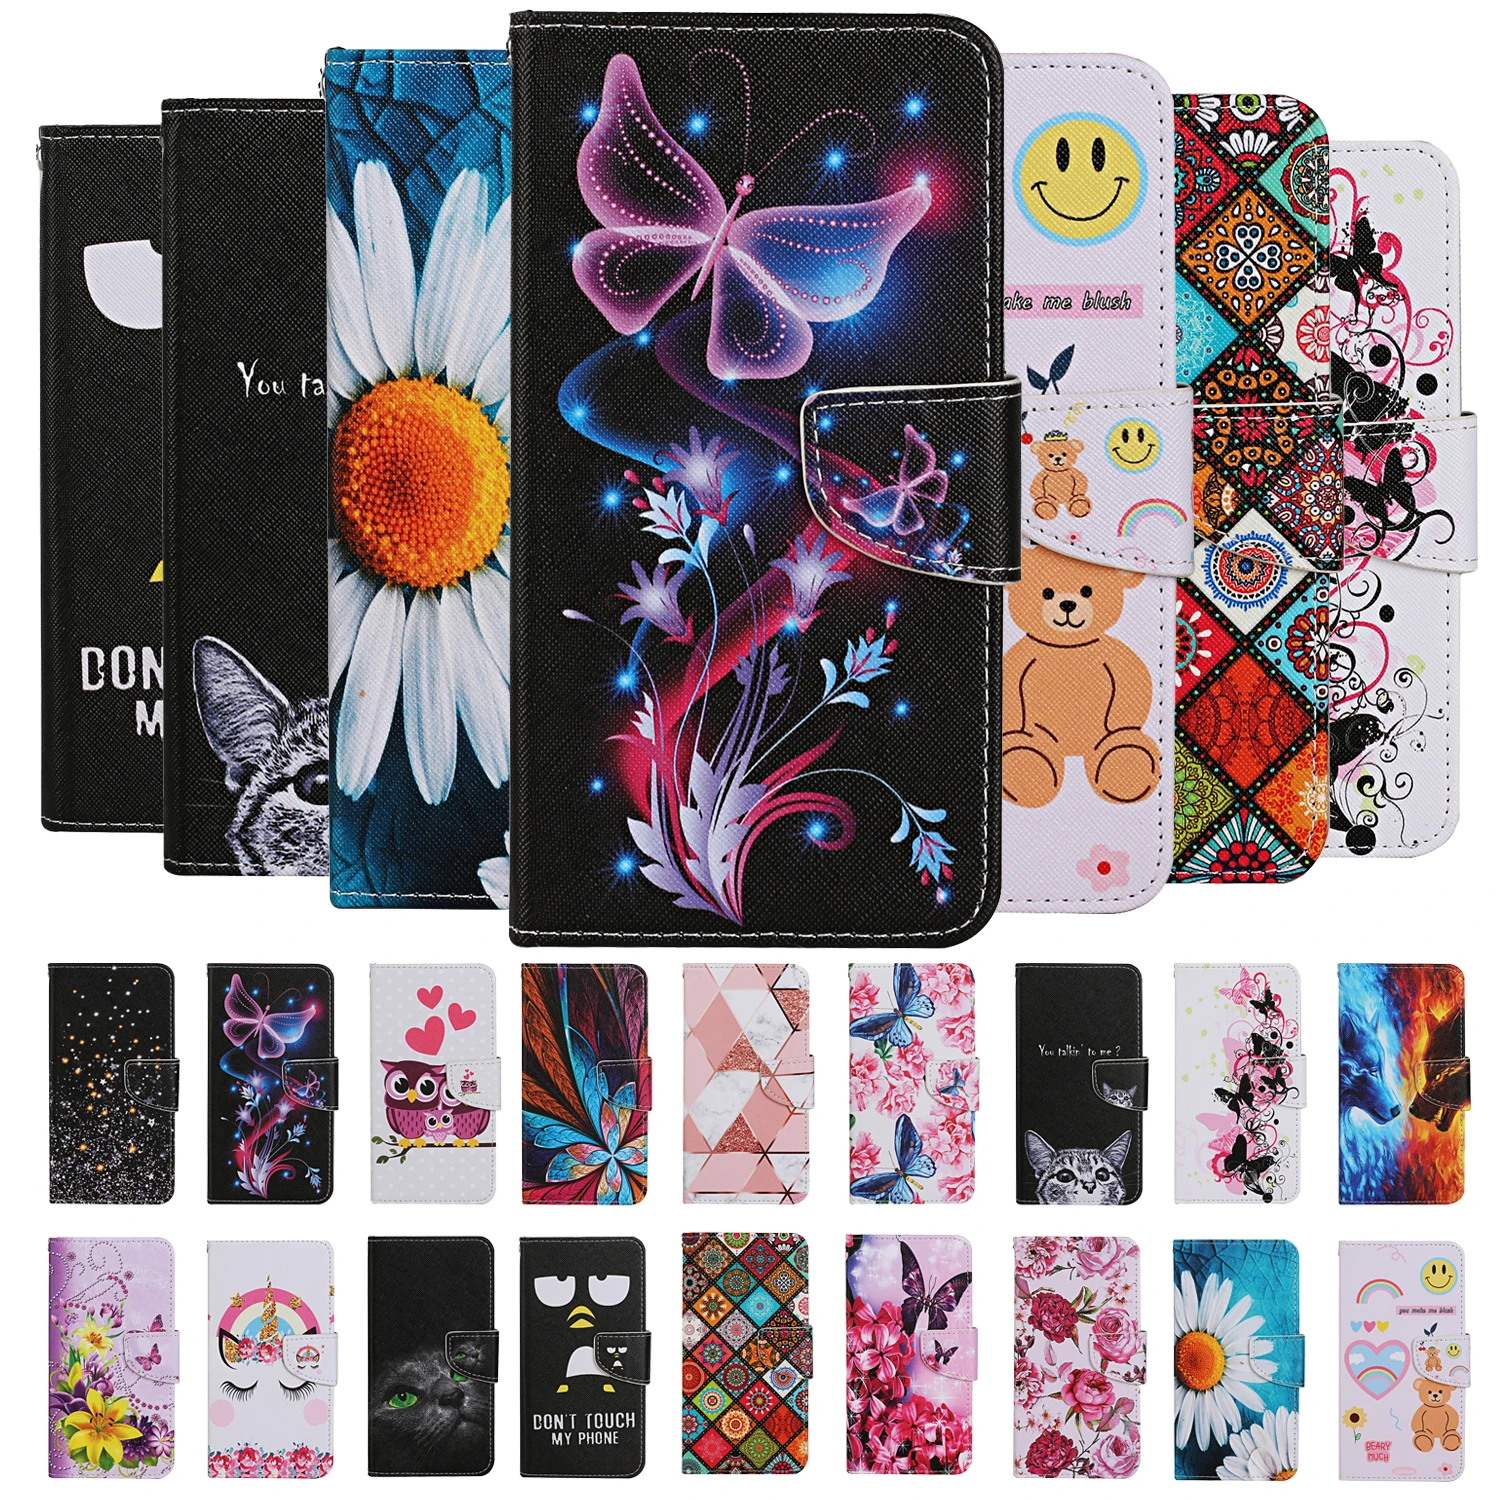 

Leather Phone Case For Samsung Galaxy A12 A51 A71 A50 A30S A21S A20E A70 A31 A11 A10 A42 A52 A72 Book Style Painted Flip Cover